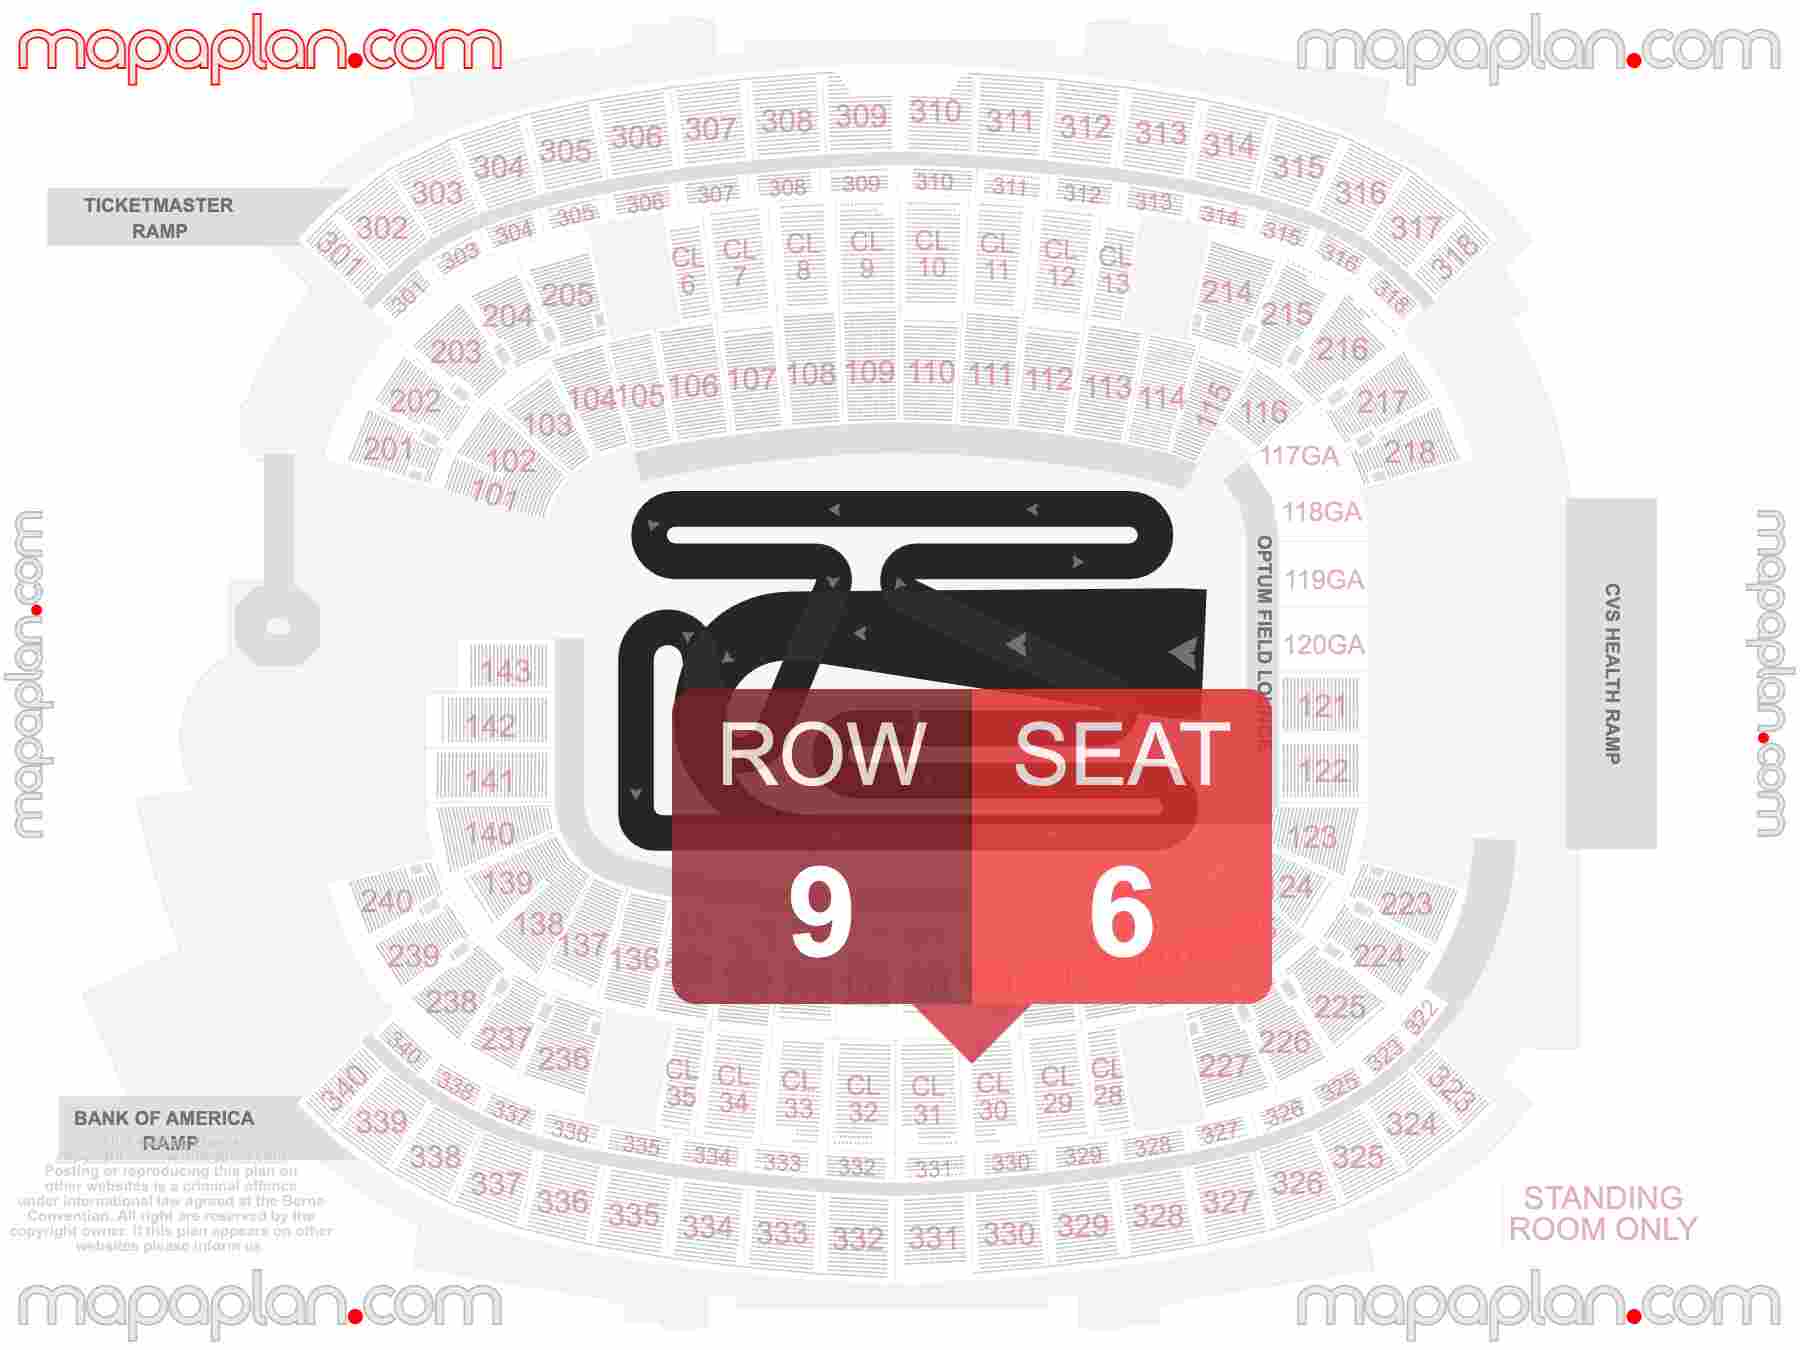 Foxborough Gillette Stadium seating chart Arenacross motorcycle racing precise seat finder - Explore seating chart with exact section, seat and row numbers